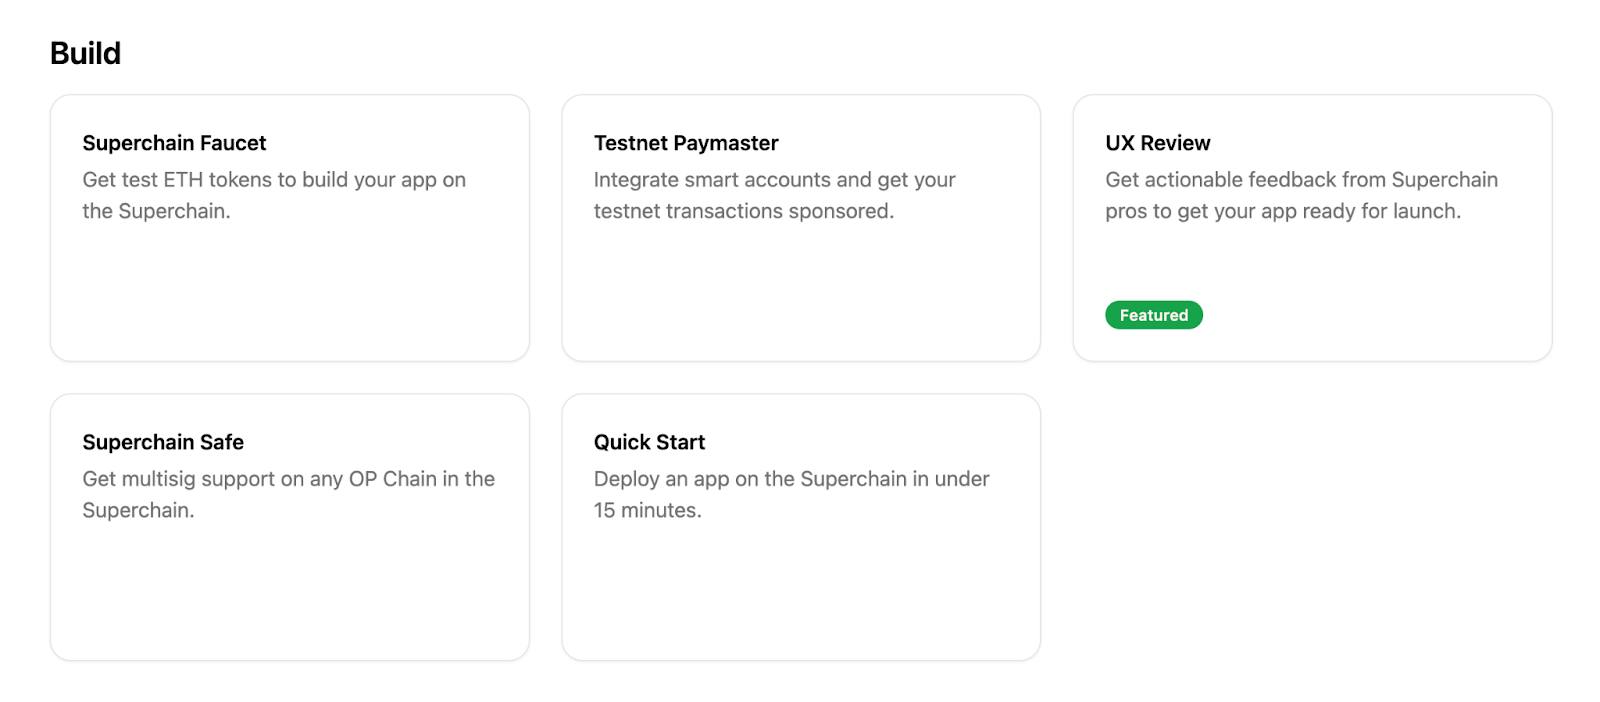 Build faster, build together: Introducing the Superchain Developer Console